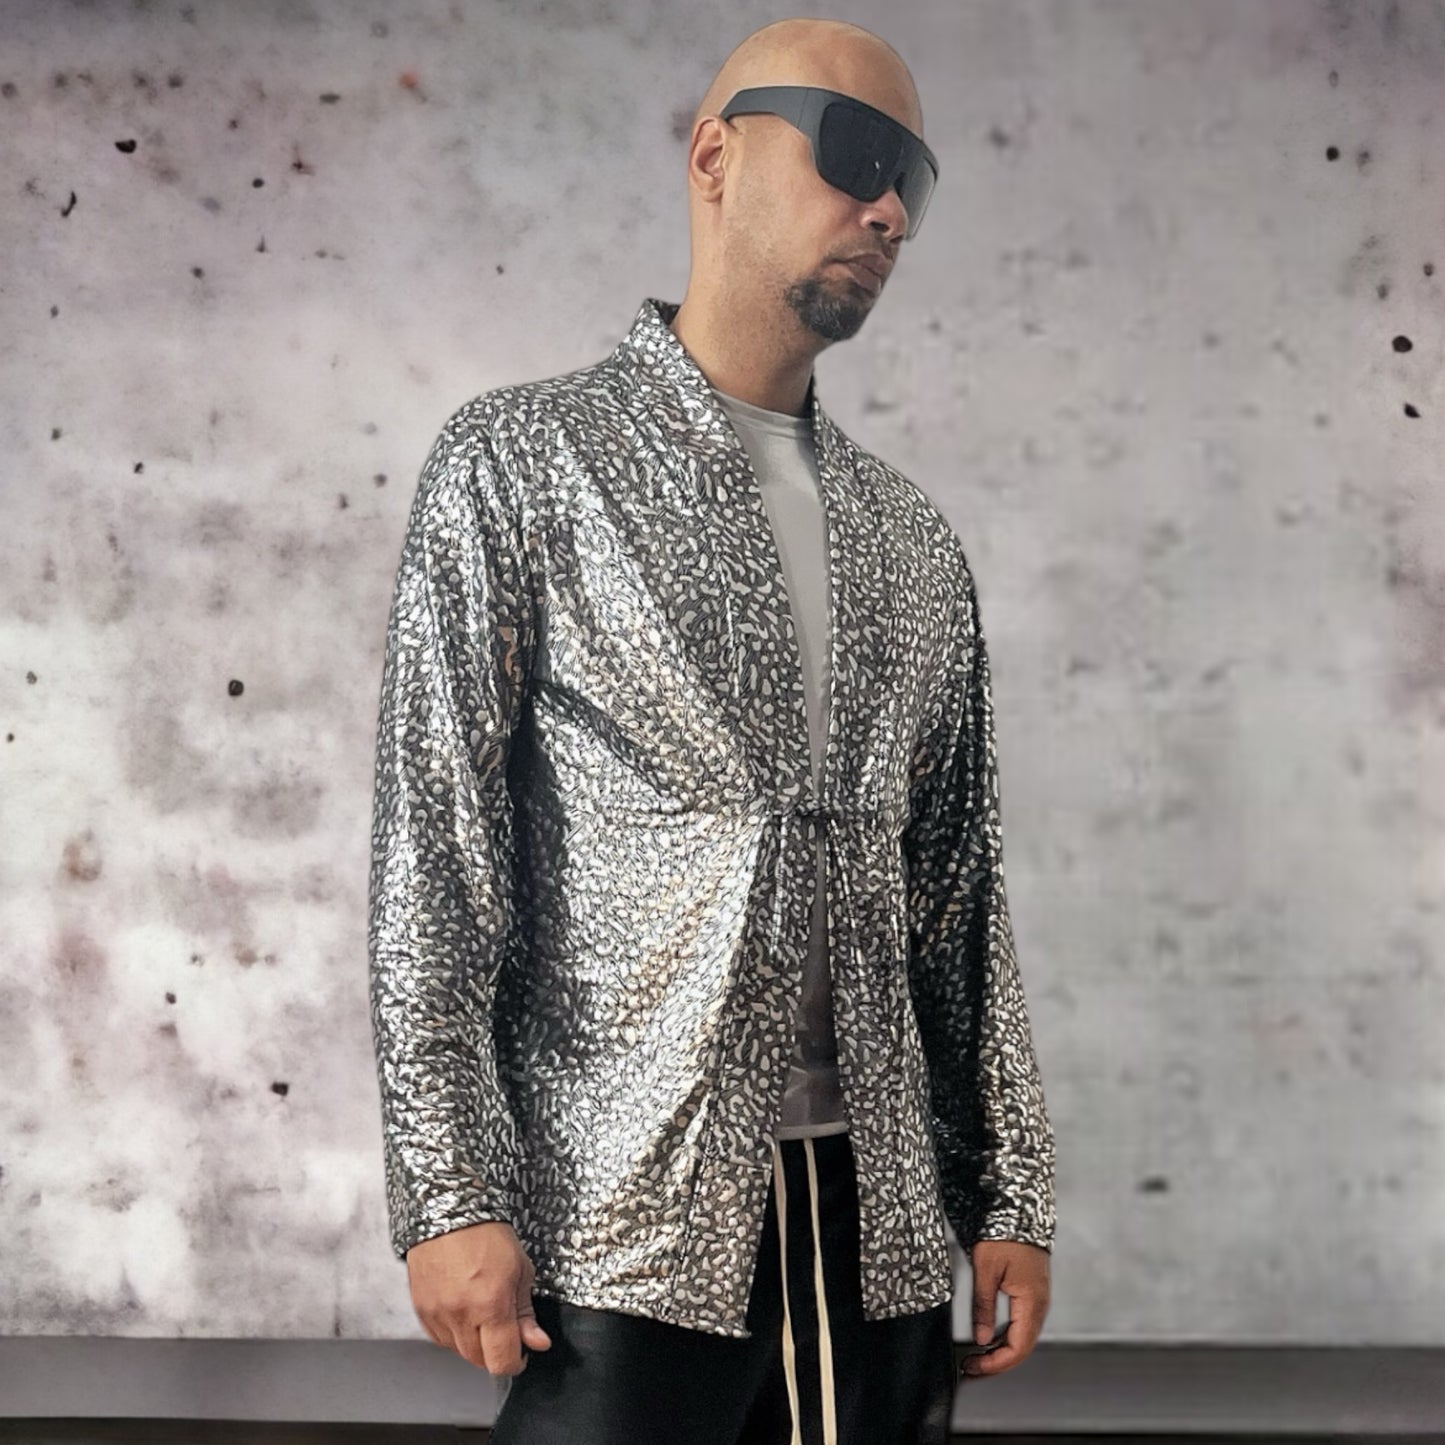 Silver Metallic Galaxy Cheetah Print Mens Kimono Shirt Jacket Perfect For Night Out DJ Outfit Festival Wear | Long Sleeve Tie Front